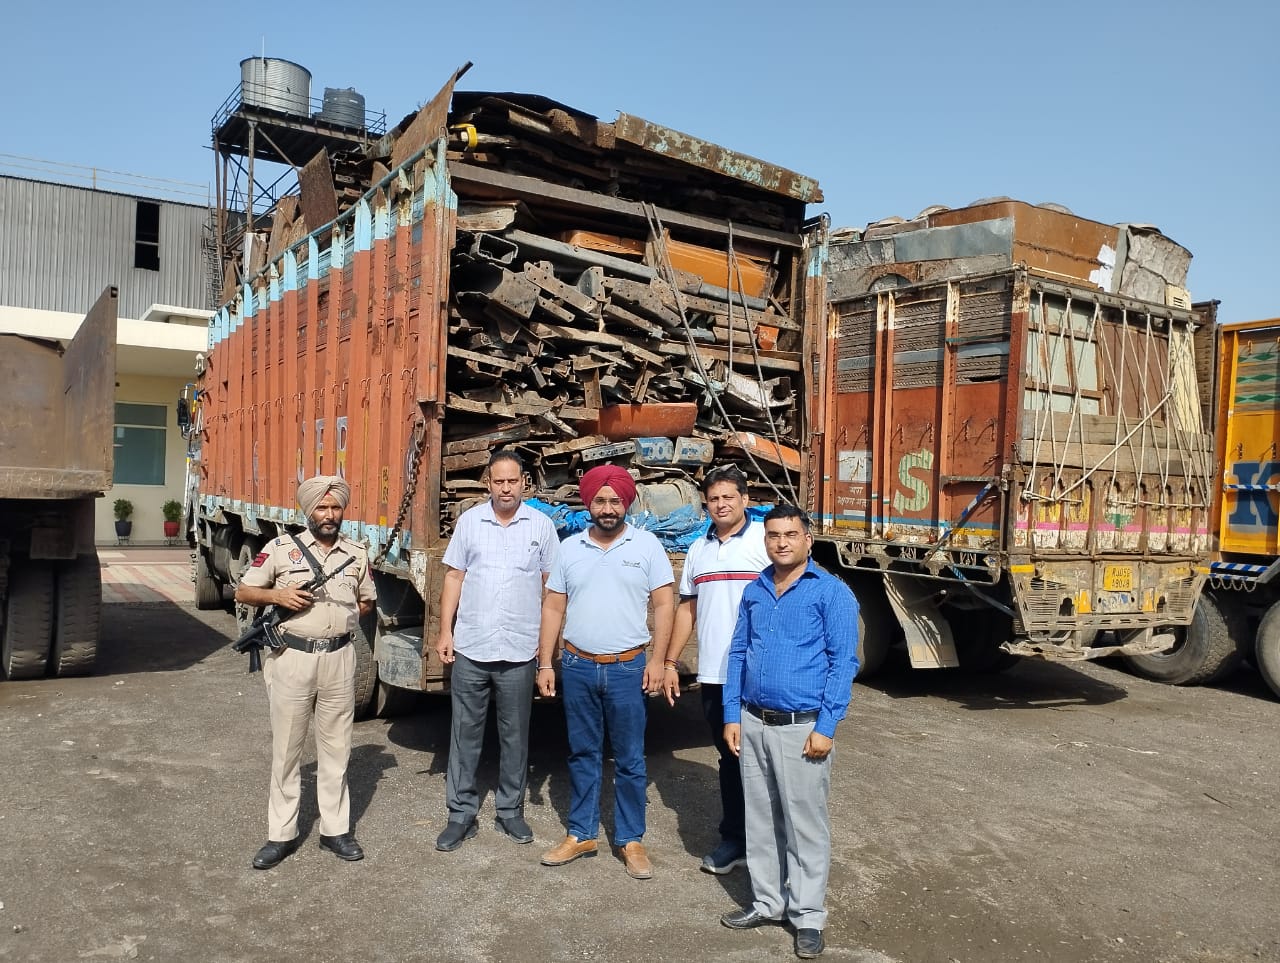 12 Furnaces inspected, 60 vehicles detained under ongoing spree against tax evaders: Cheema